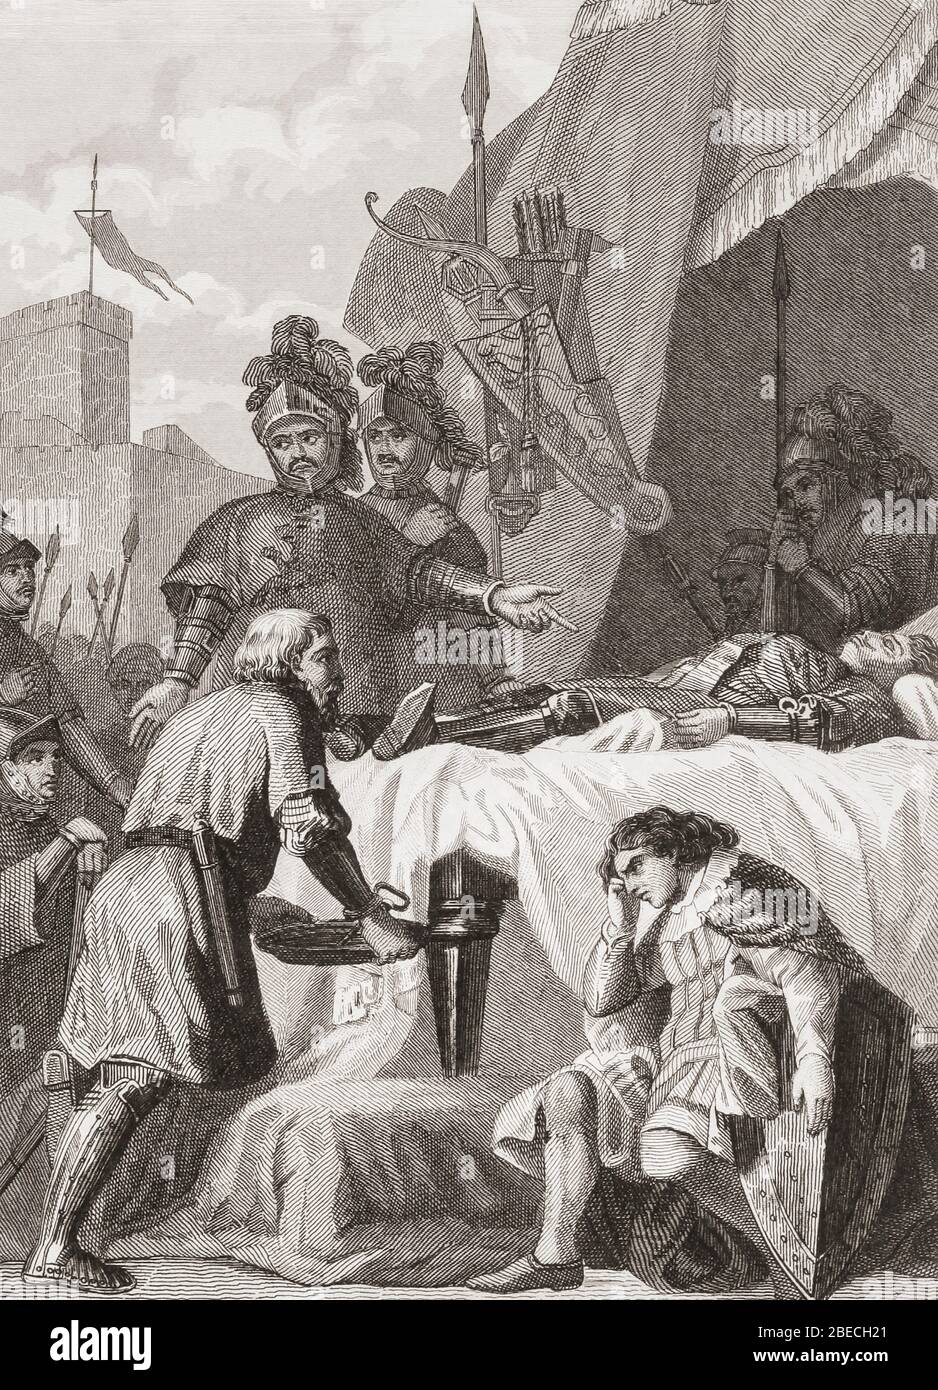 The death of Rodrigo Díaz de Vivar, c. 1043 - 1099.  To the Christians, he was known as El Campeador, or The Champion.  The Muslims knew him as El Cid, The Lord.  From Las Glorias Nacionales, published in Madrid and Barcelona, 1852. Stock Photo